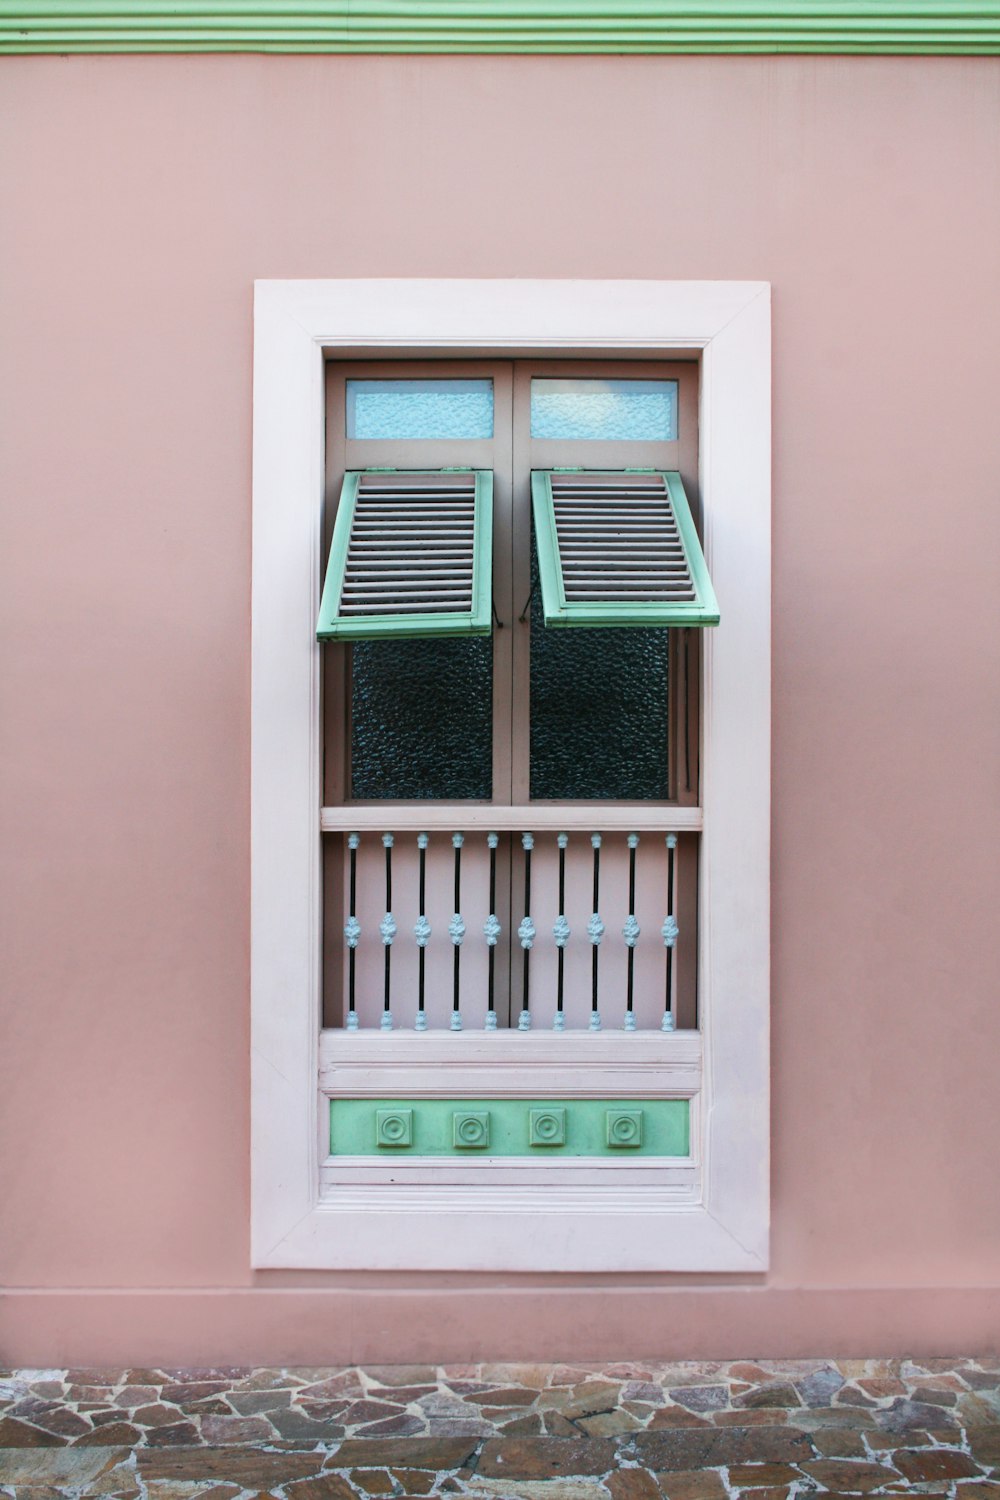 opened white teal and brown wooden louvered window panel